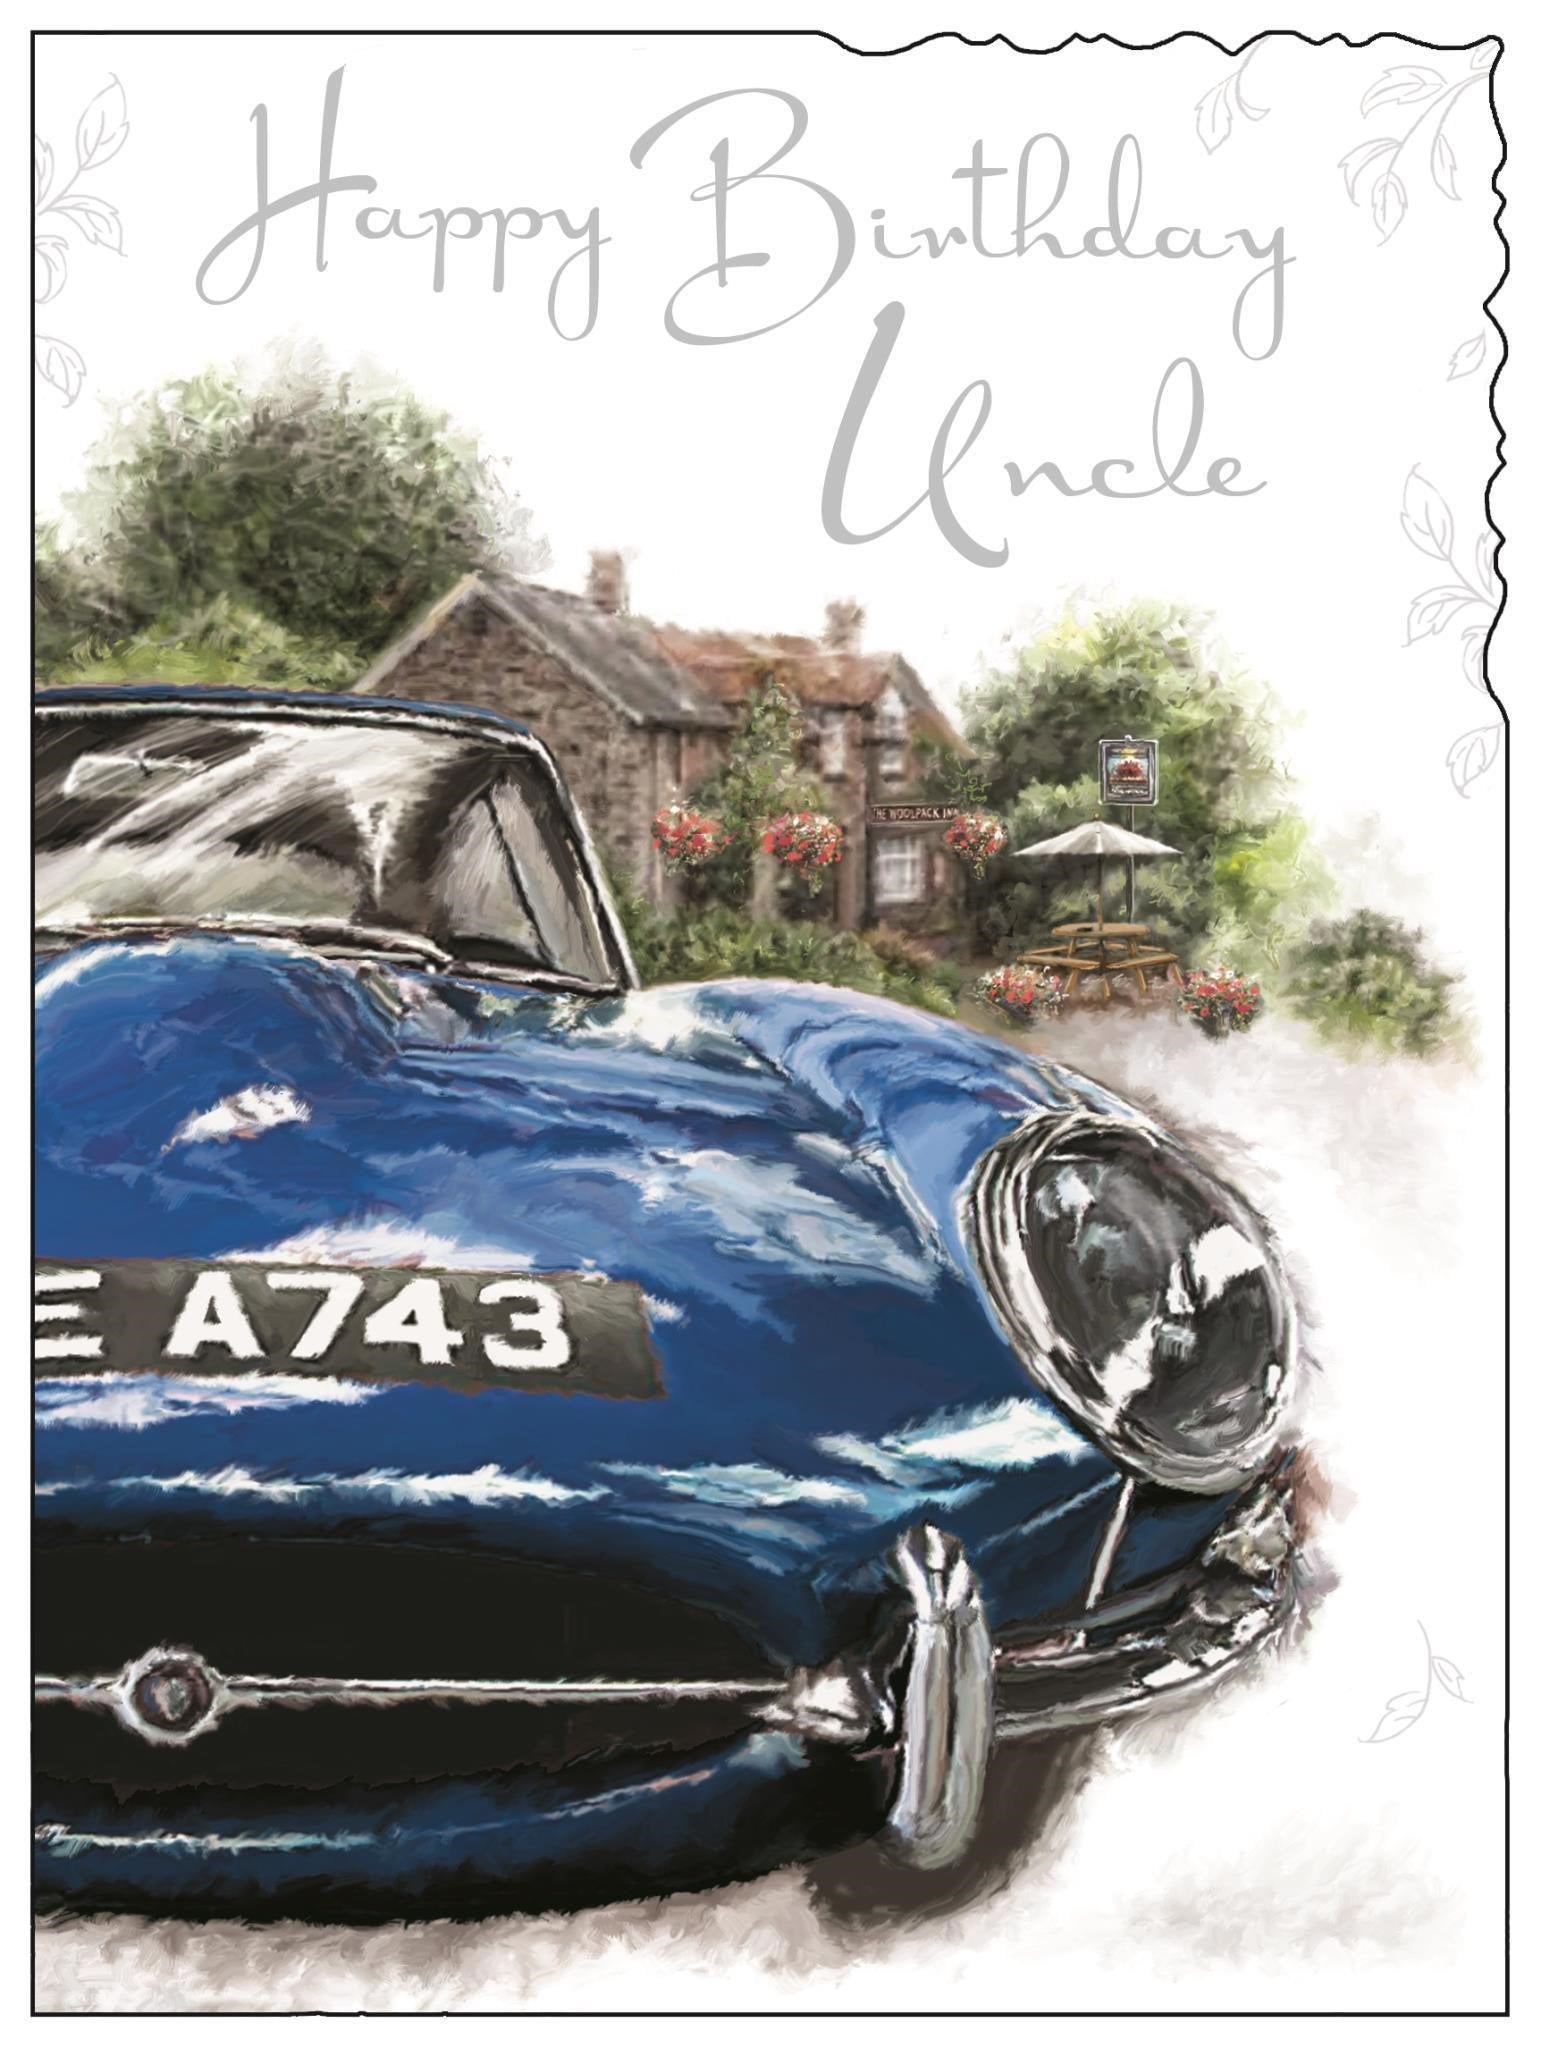 Front of Uncle Birthday Car Greetings Card